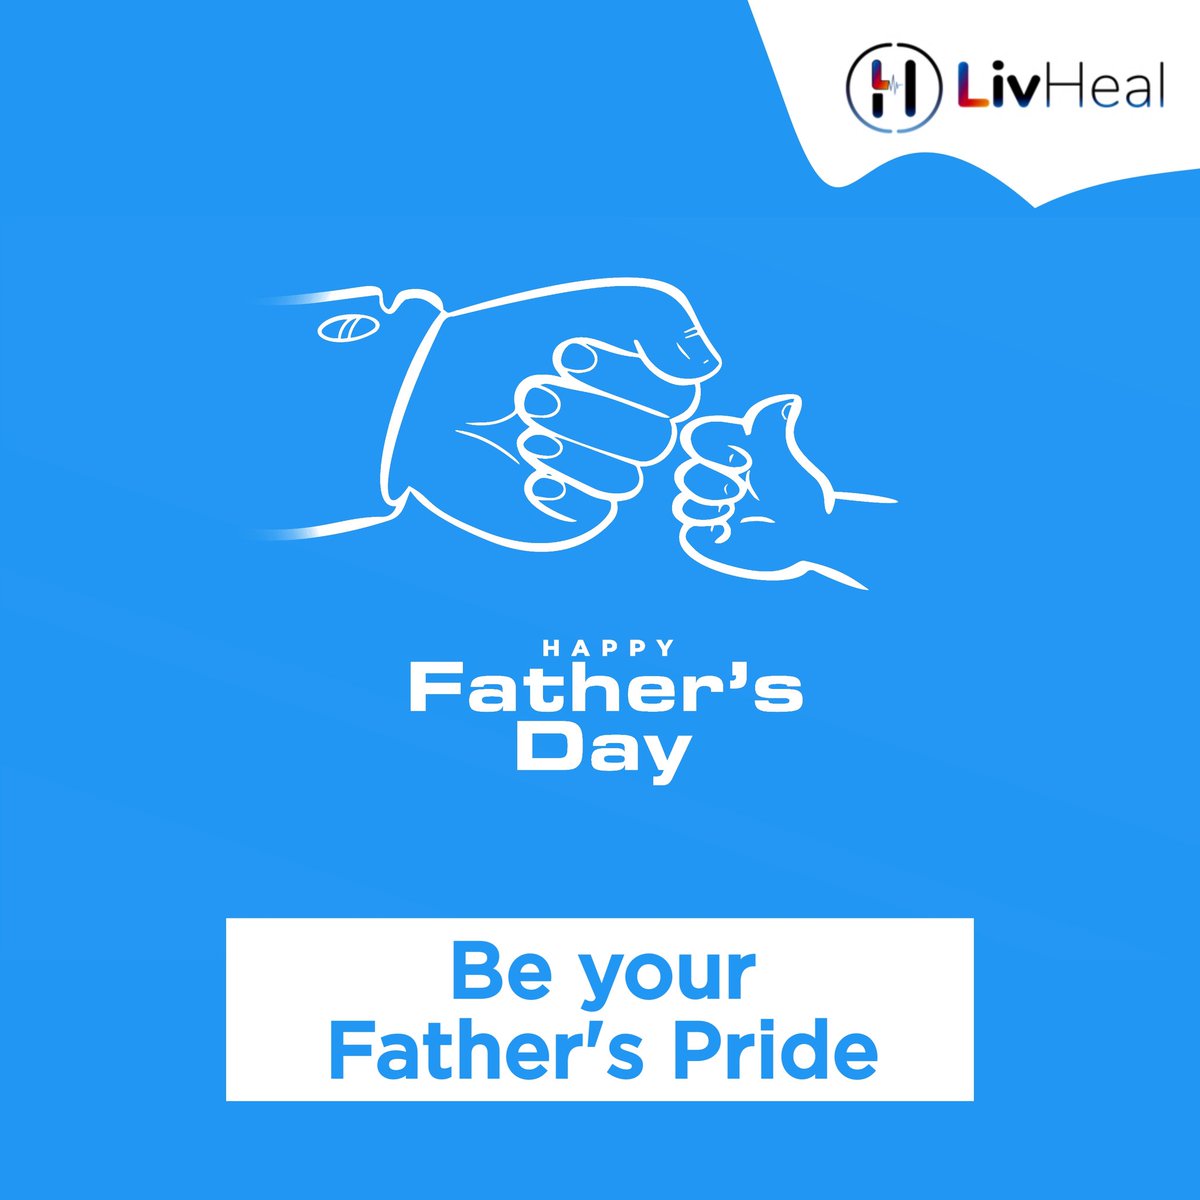 🎉 Happy Father's Day to all instructors and health seekers! 🎉
❤️‍🔥 Be your father's pride ❤️‍🔥

#FathersDay #HealthyBonds #FitnessJourney #DadsLove #StrongFathers   #FatherAndChildGoals #ProudFitnessEnthusiast #MotivationMonday  #FatherlyLove #FatherFigure  #FatherChildBond